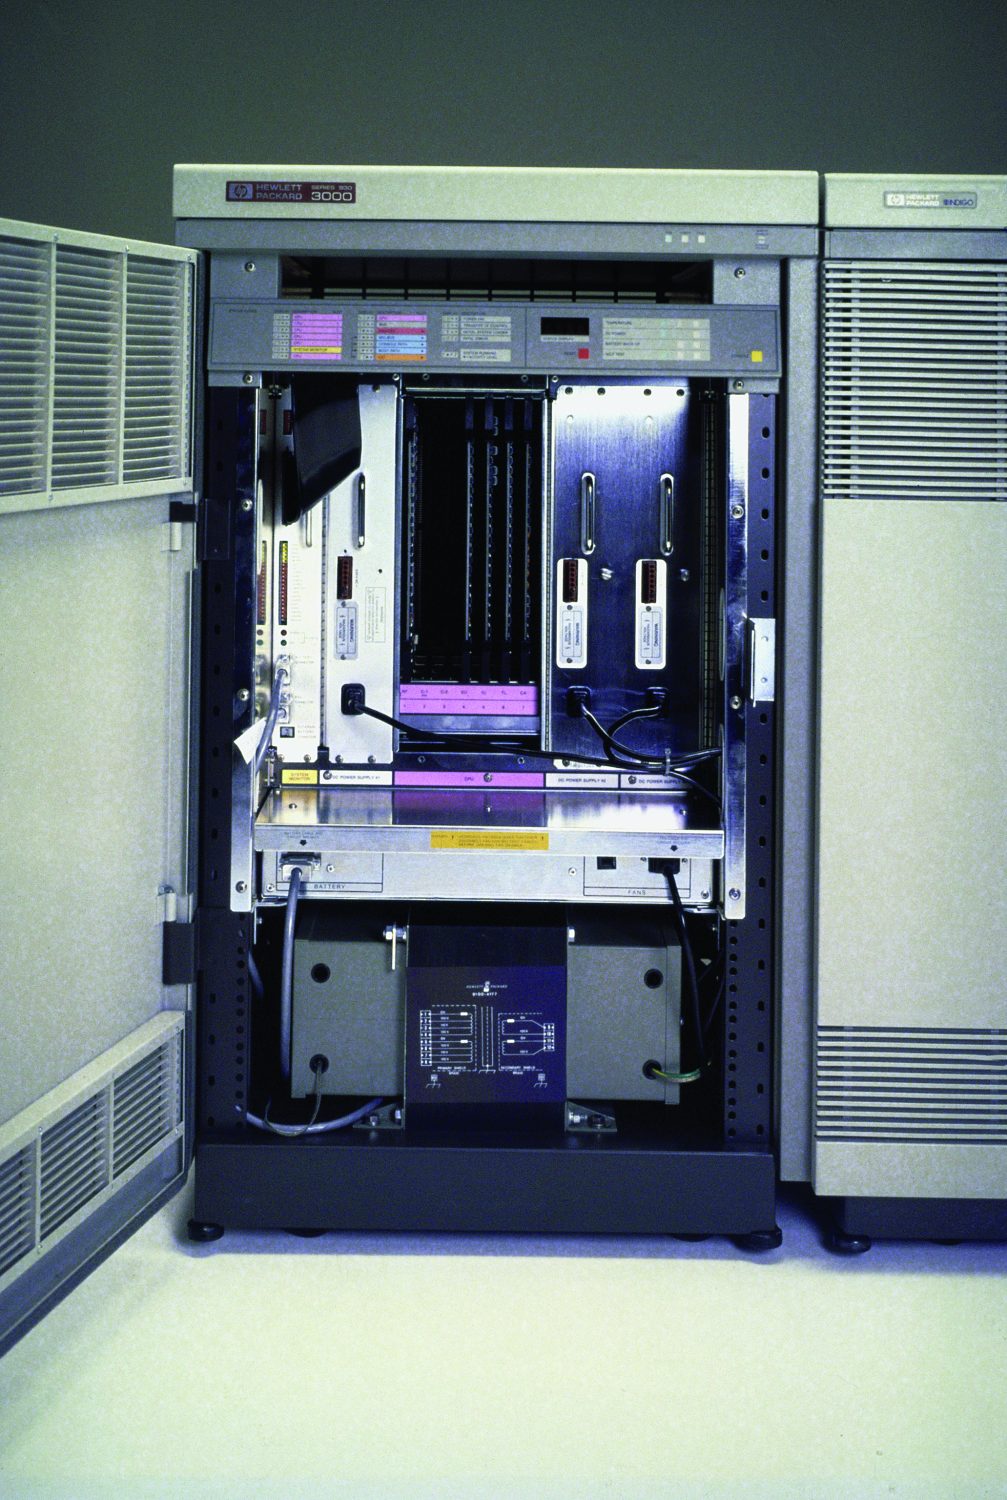 The HP 3000 series 900 with console door open in 1986.